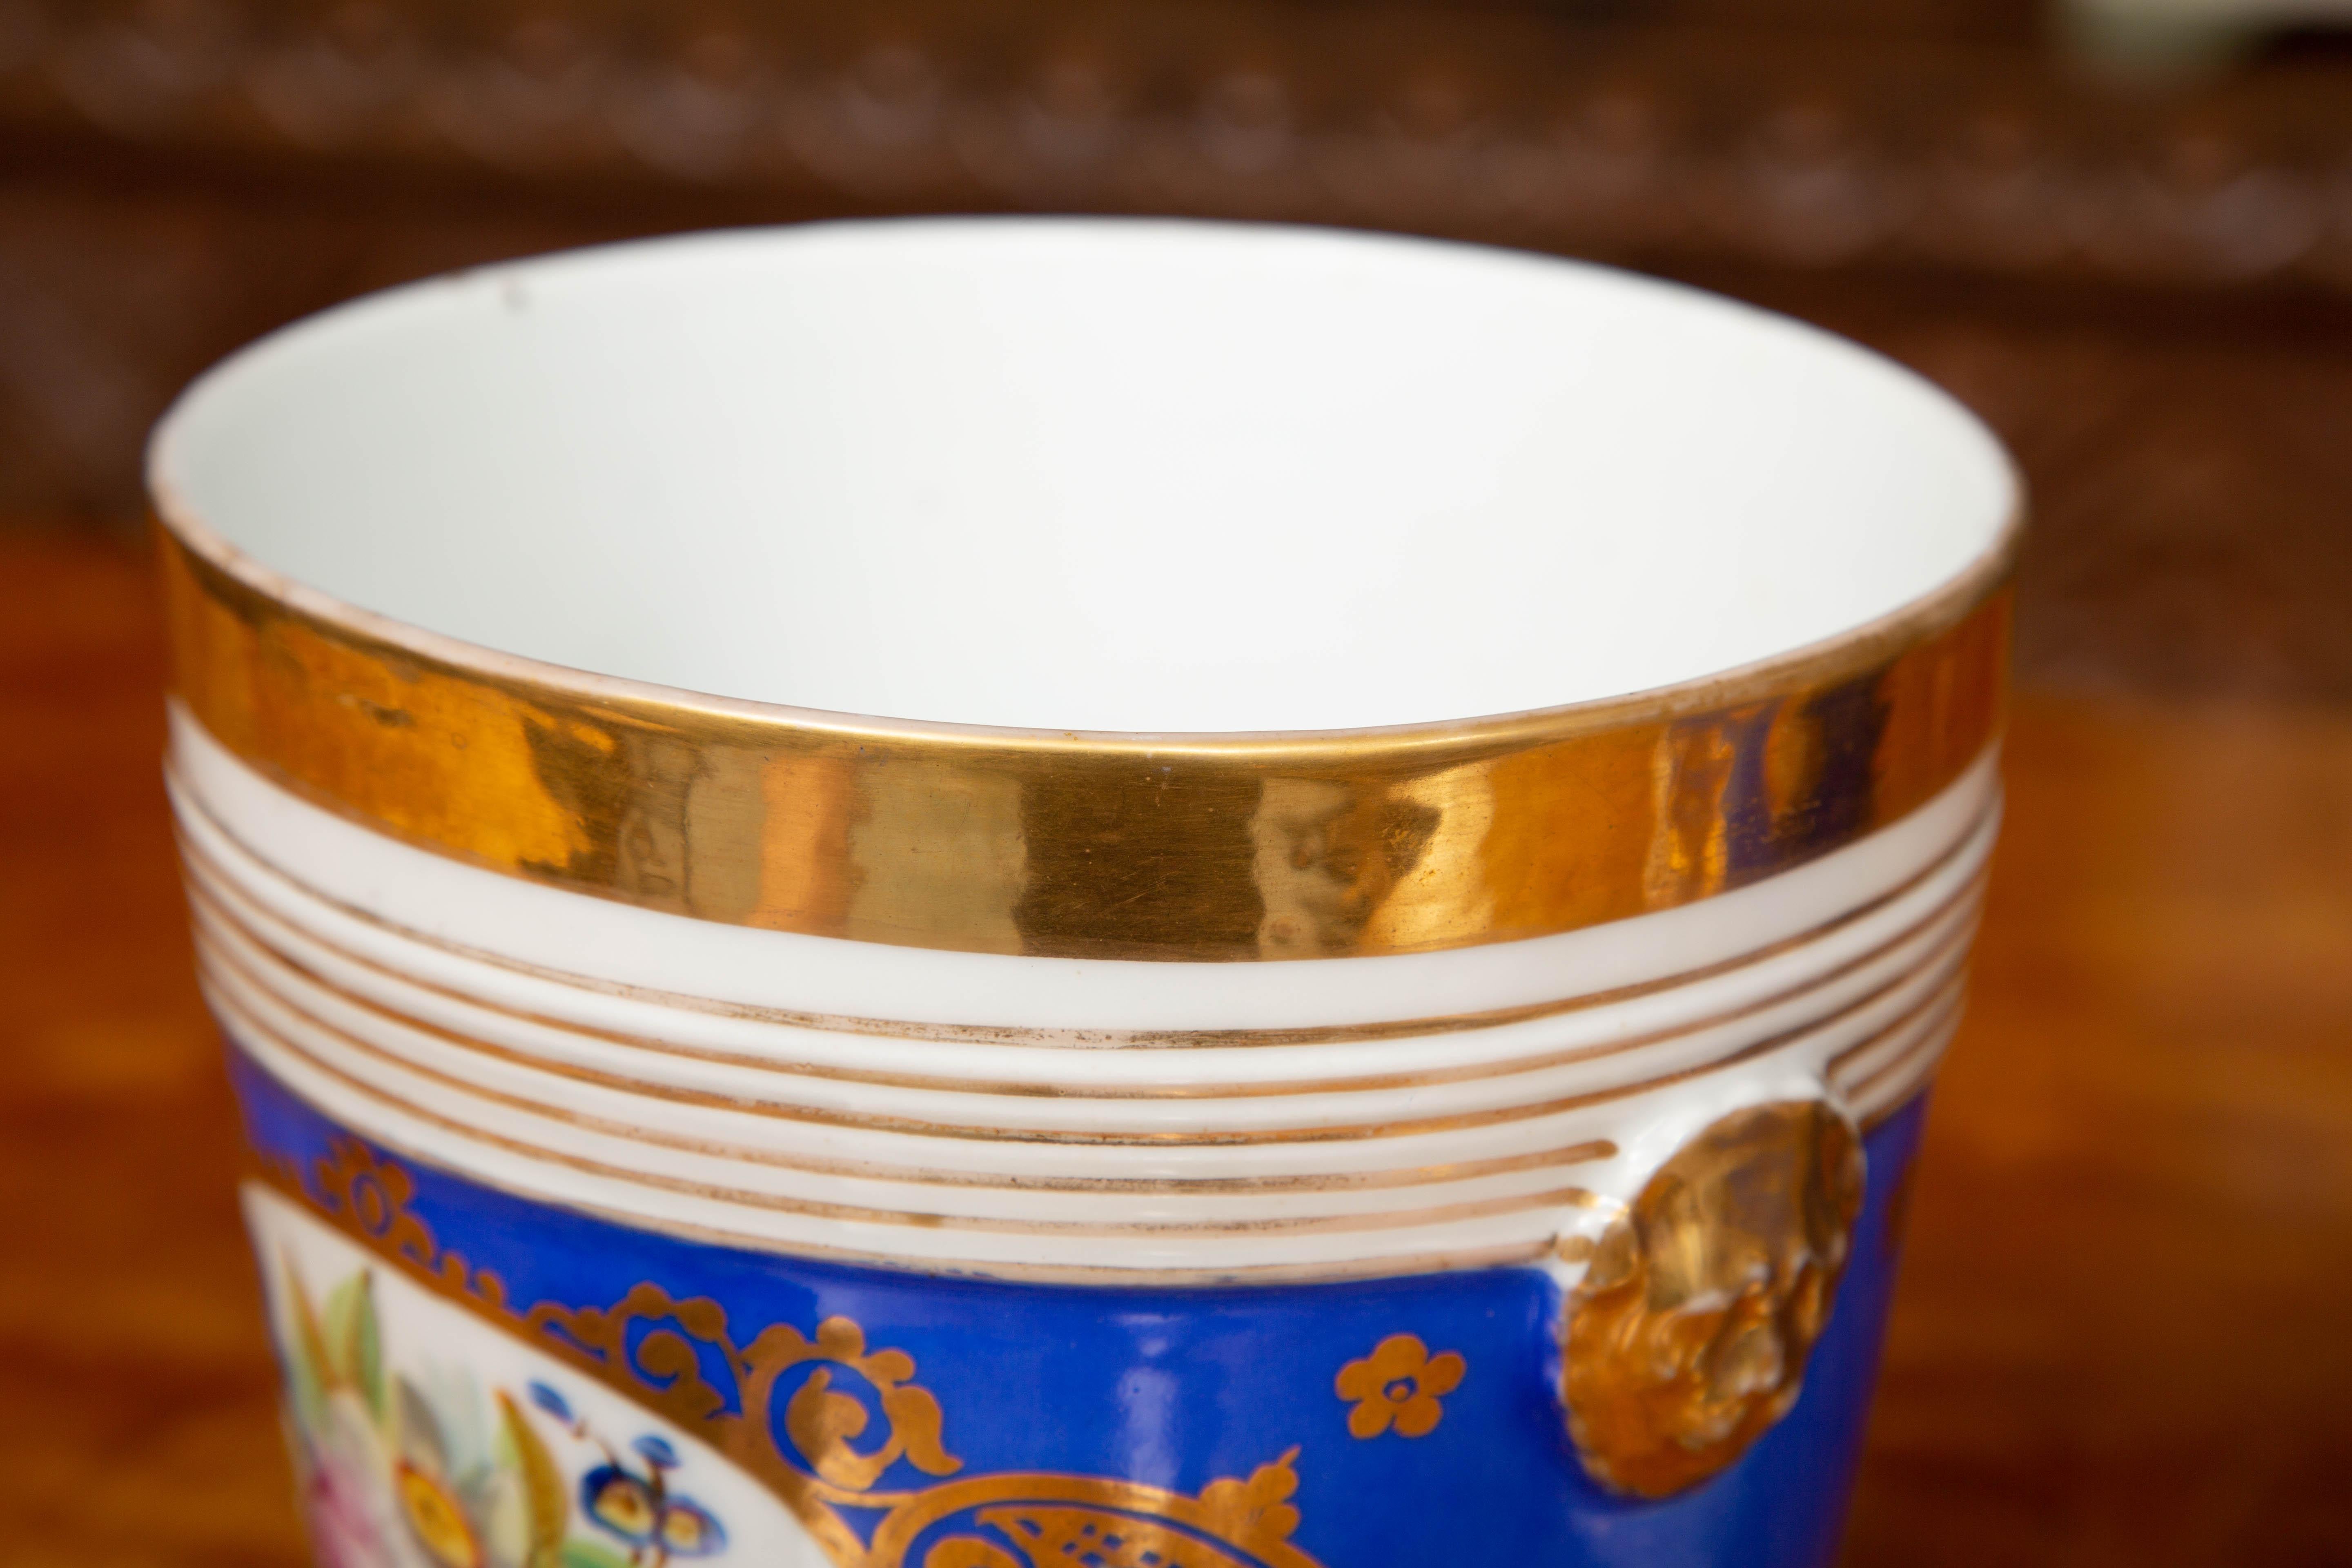 These are a classic pair of French Old Paris cache-pots. The blue ground is decorated with a central floral bouquet surrounded by an elaborate gilt design. Also the design includes reeded horizontal gilt stripes a wide top gold band and impressions